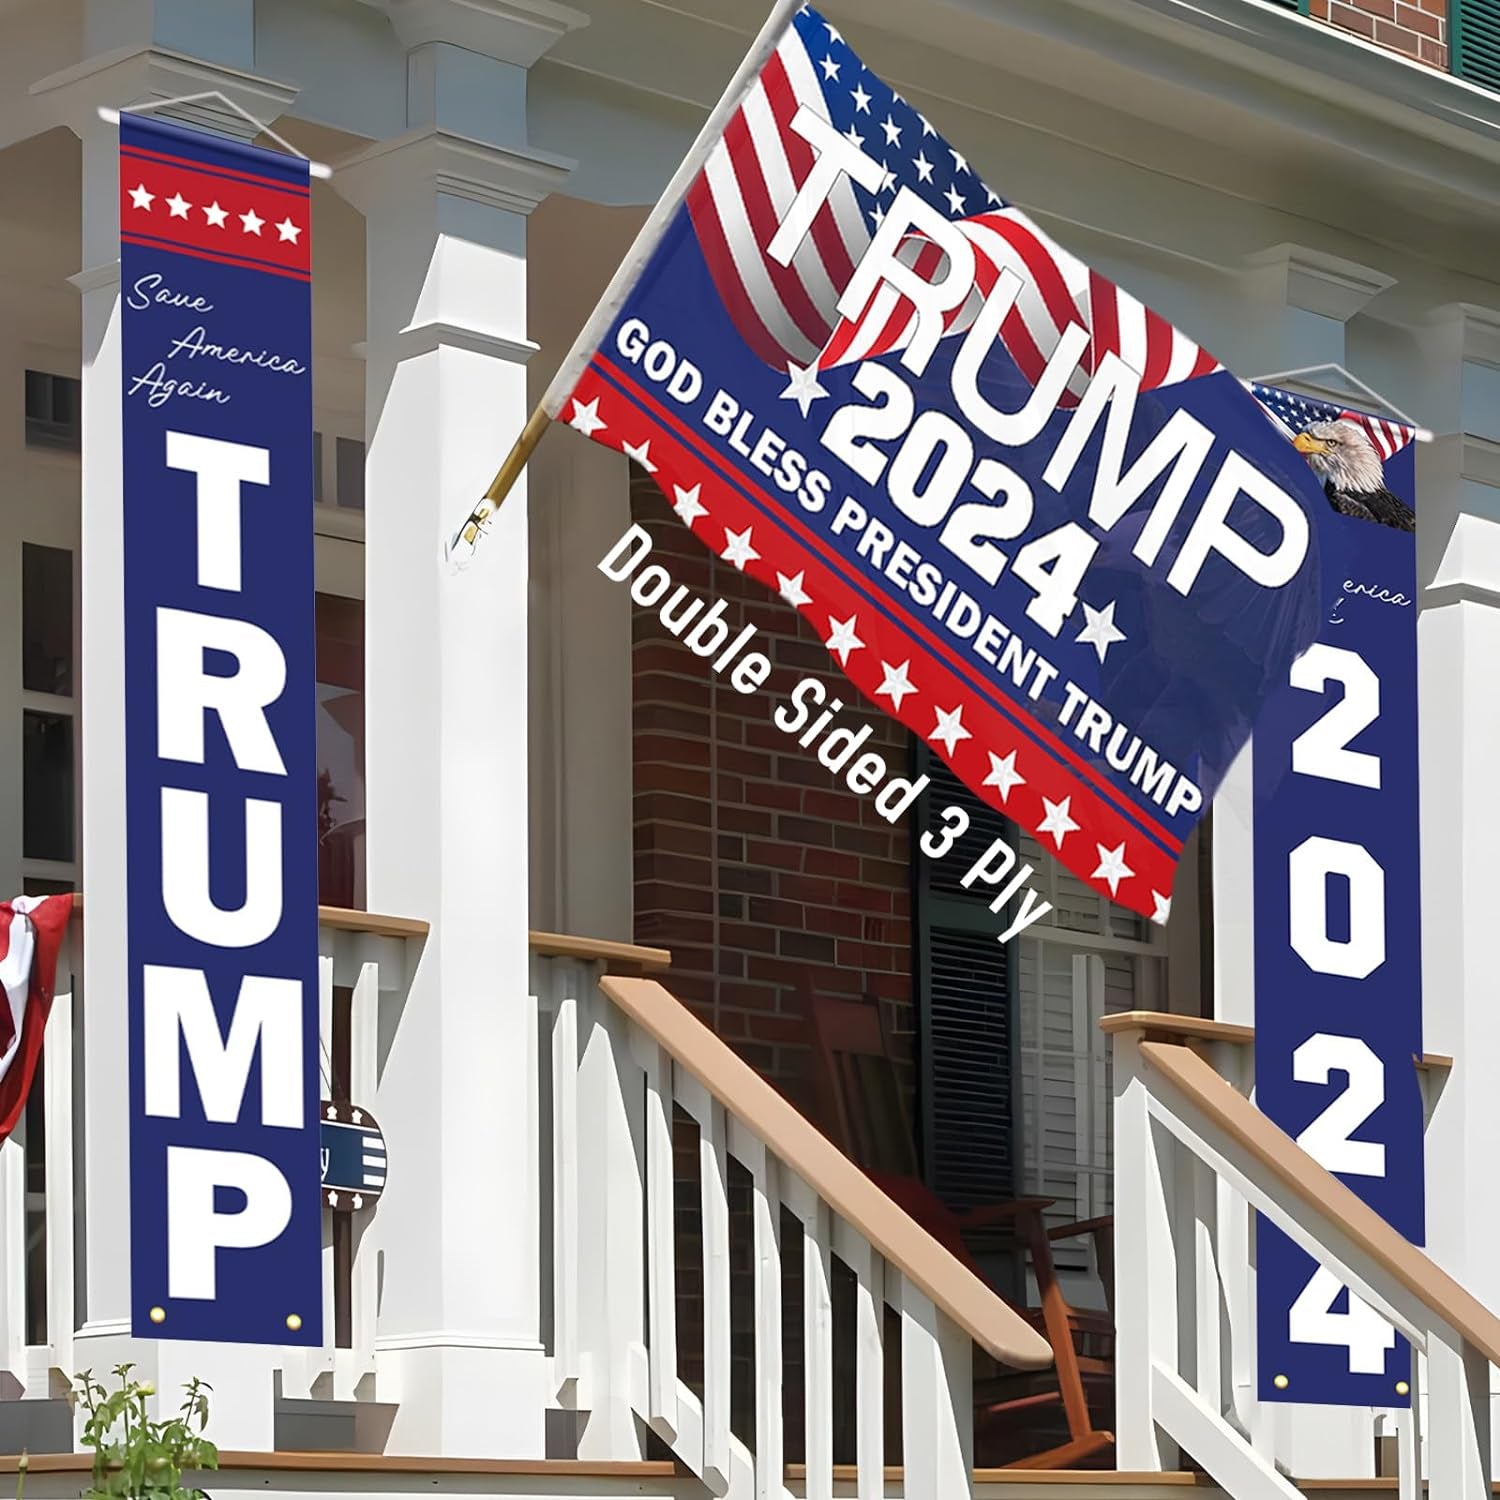 Trump 2024 Flag - 3 X 5 FT Double Sided 3 Ply "God Bless President Trump" Flags with 2024 Hanging Banners Set - Memorial Day Decorations - 4Th of July Decorations - Donald Trump Sign for Outdoor Home